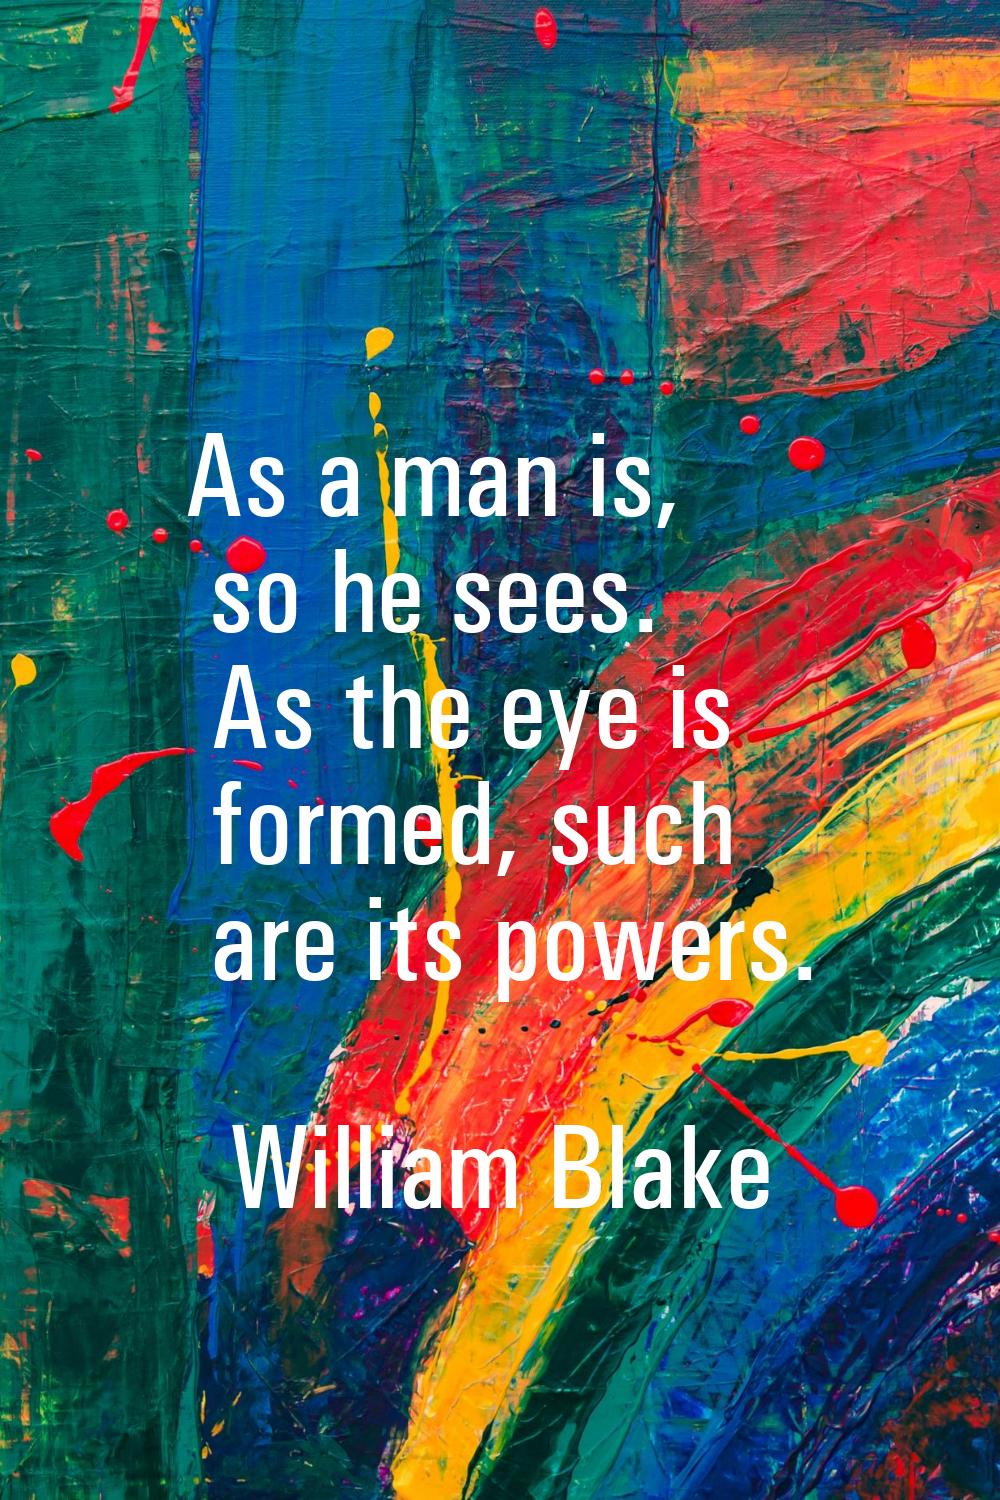 As a man is, so he sees. As the eye is formed, such are its powers.